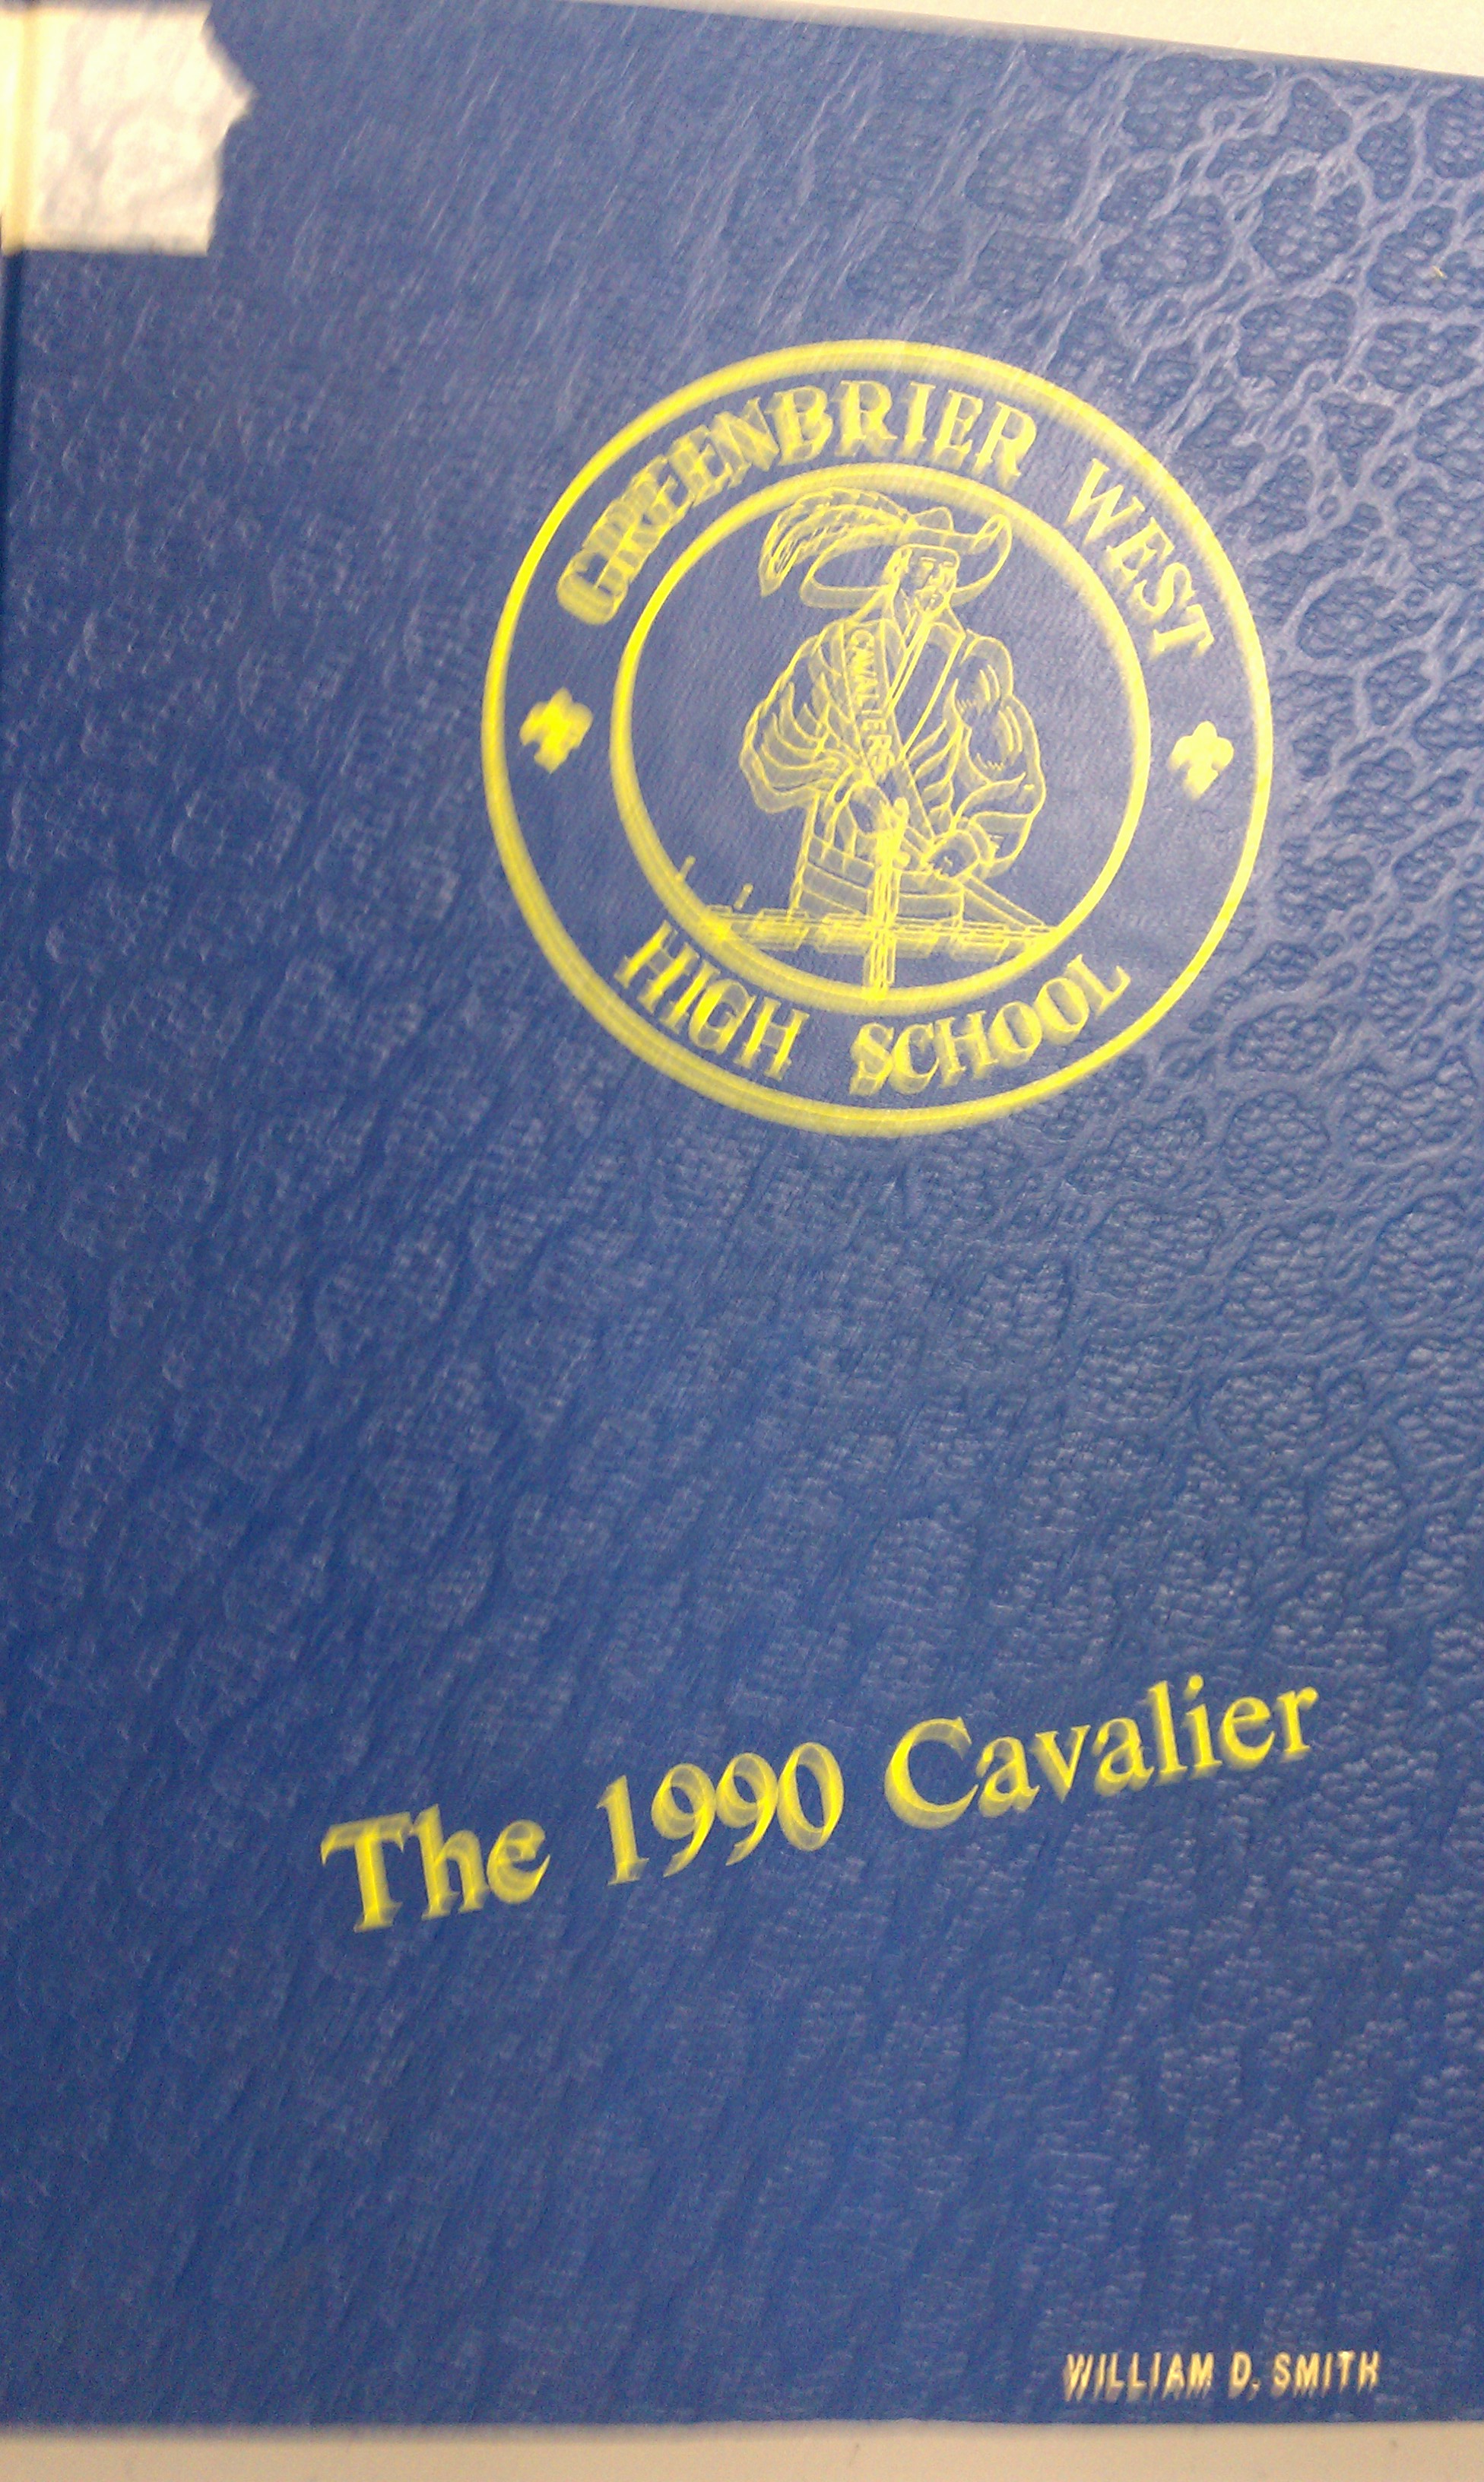 1989 yearbook